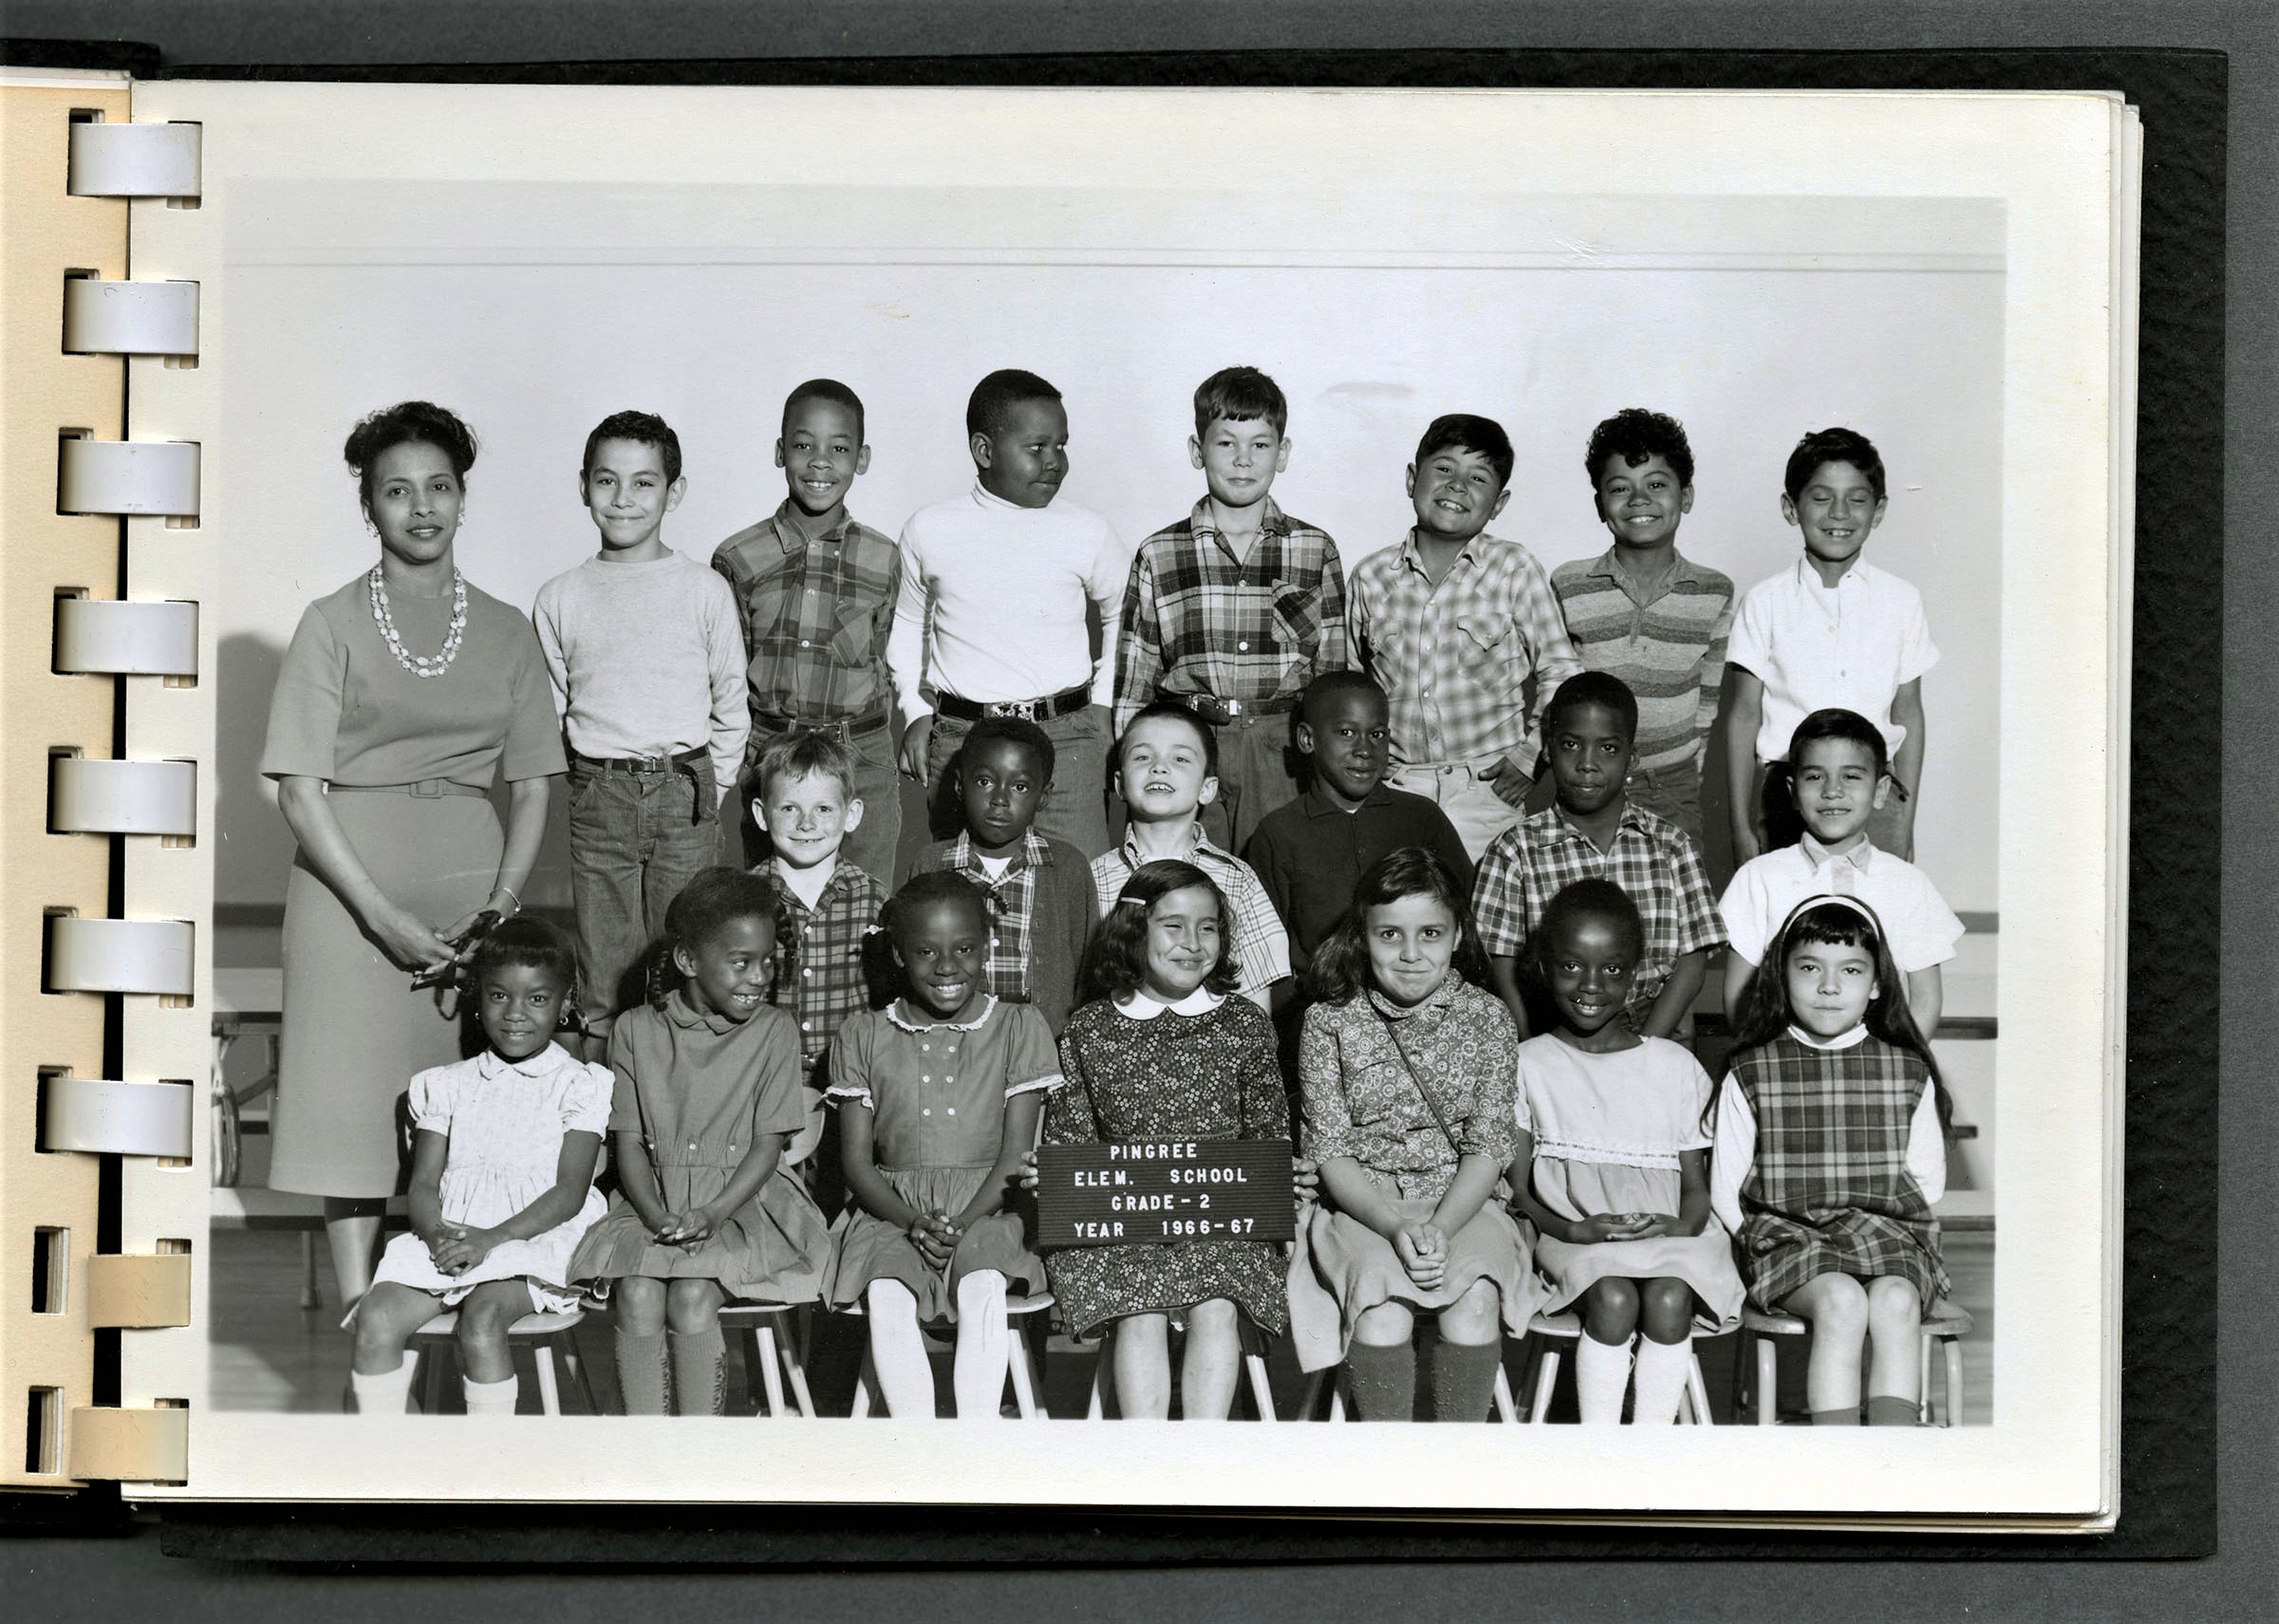 To show a 2nd grade class from the 1966-67 school year.